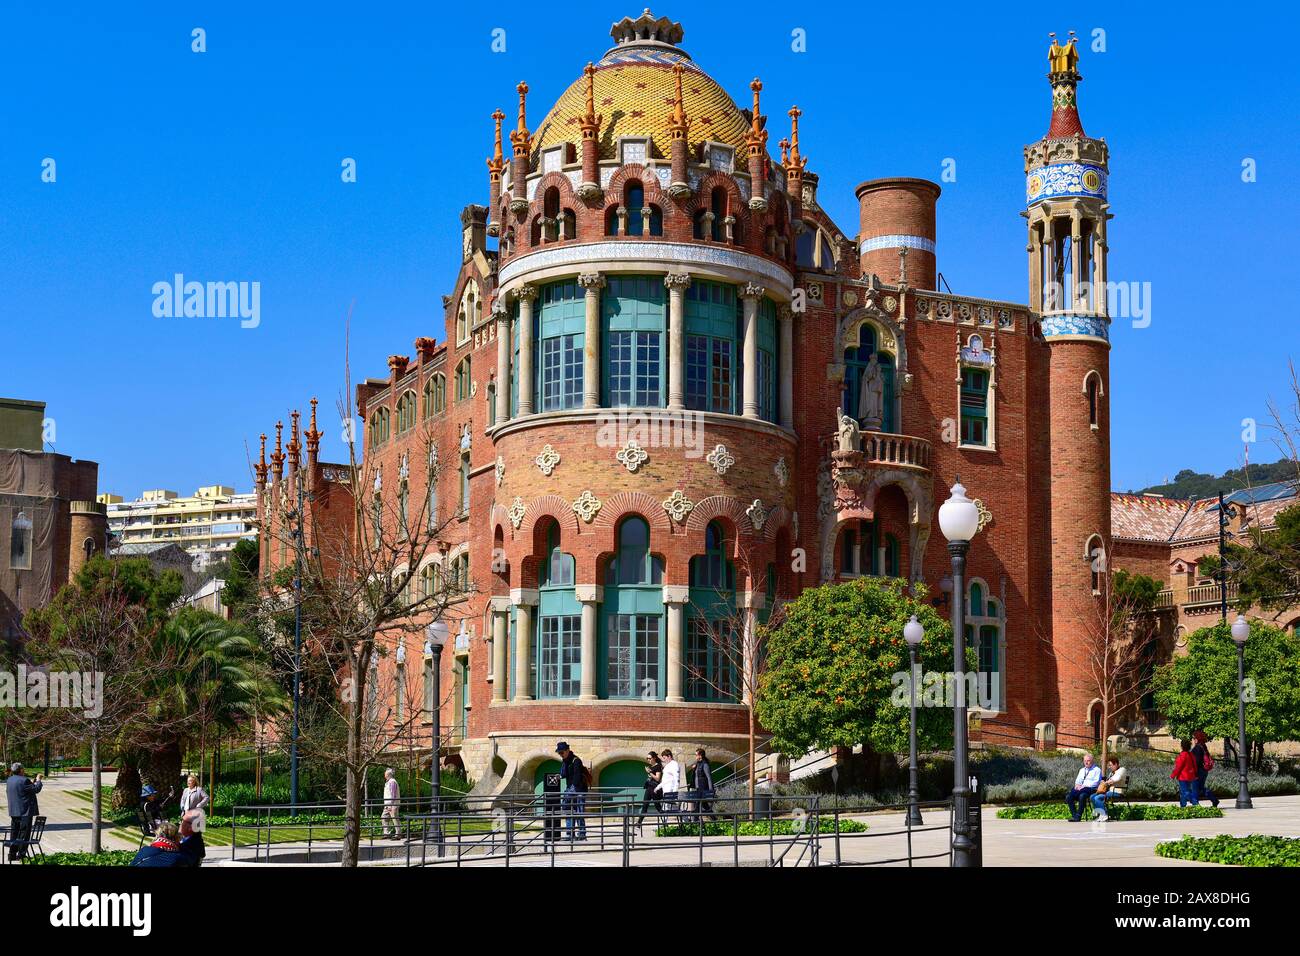 BARCELONA, SPAIN - MARCH 18, 2017: Visitors at the modernist complex of the Hospital de Sant Pau in Barcelona, Spain, which is part of the UNESCO Worl Stock Photo